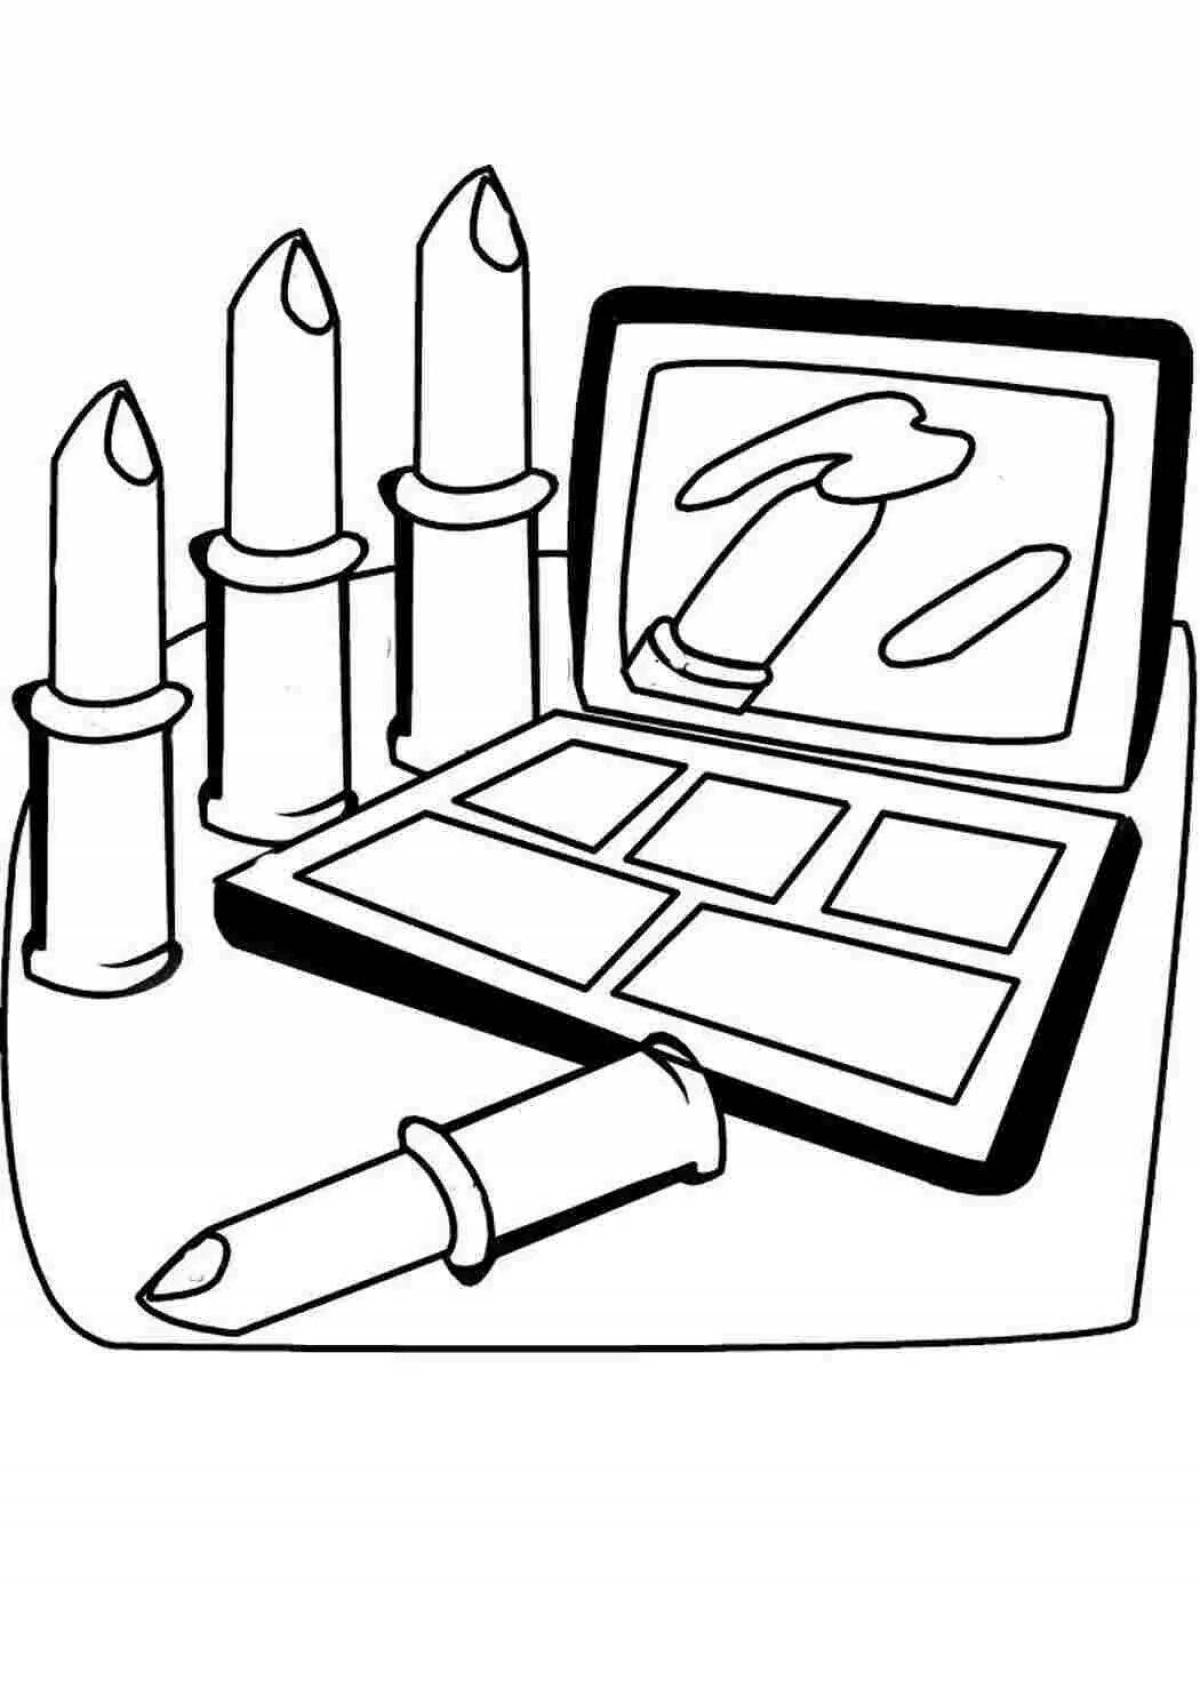 Teen dazzling lipstick coloring page